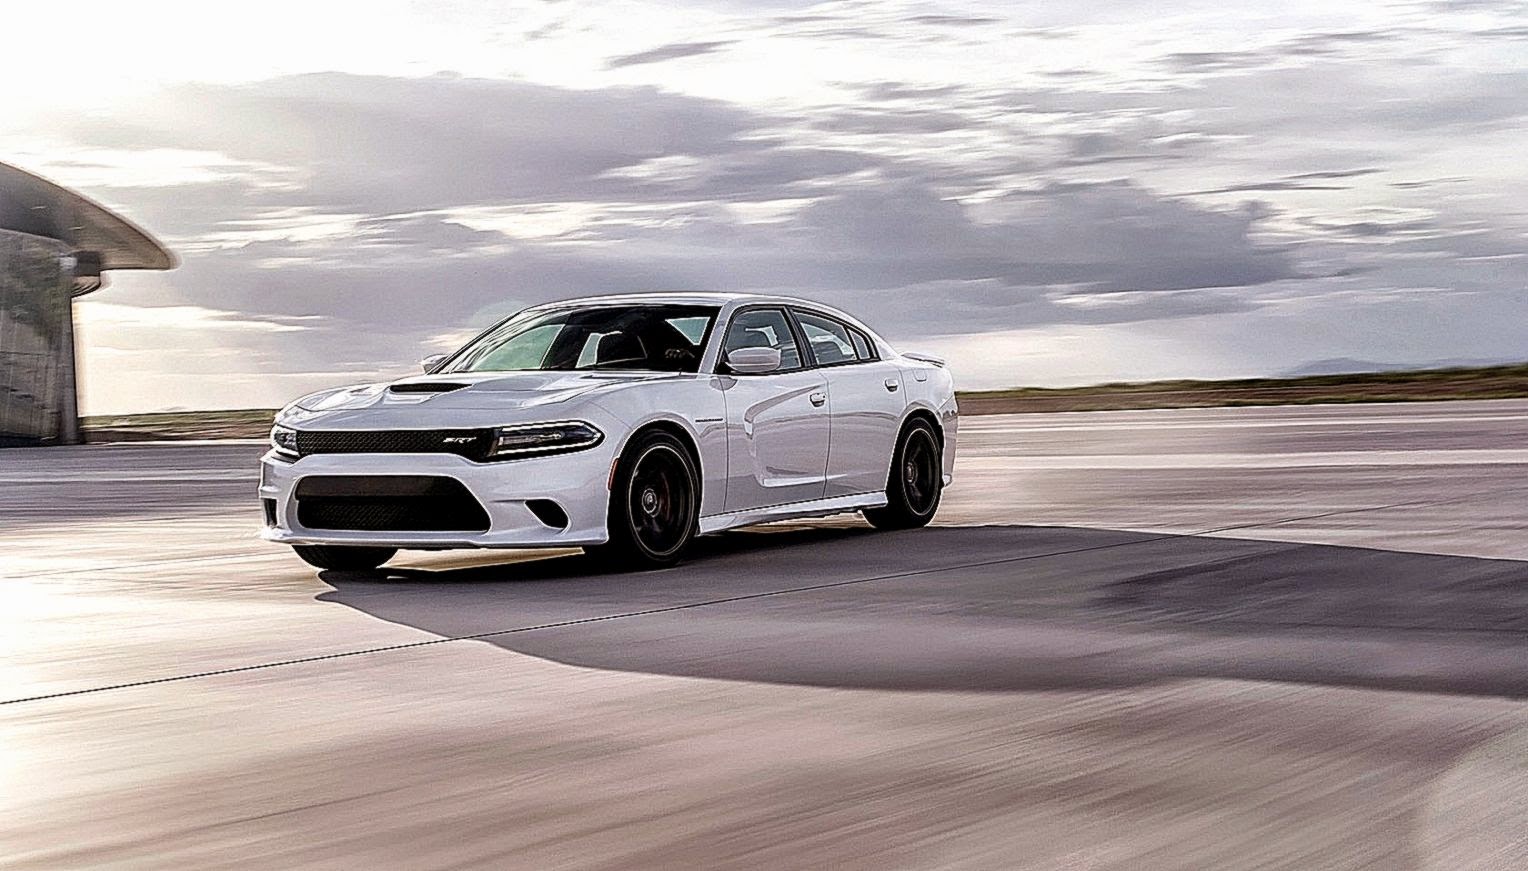 Awesome 2015 Dodge Charger Wallpaper